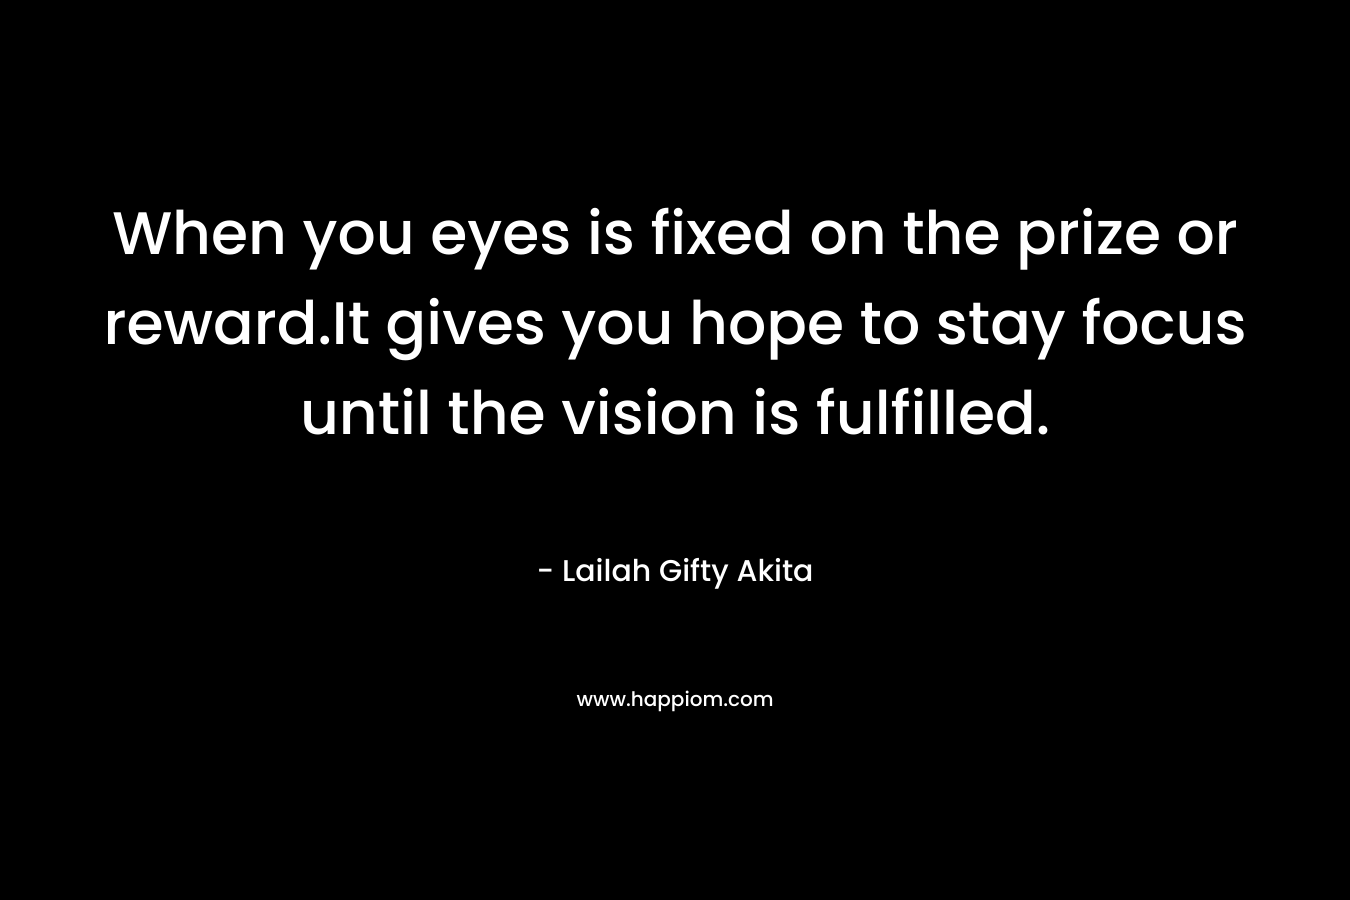 When you eyes is fixed on the prize or reward.It gives you hope to stay focus until the vision is fulfilled.